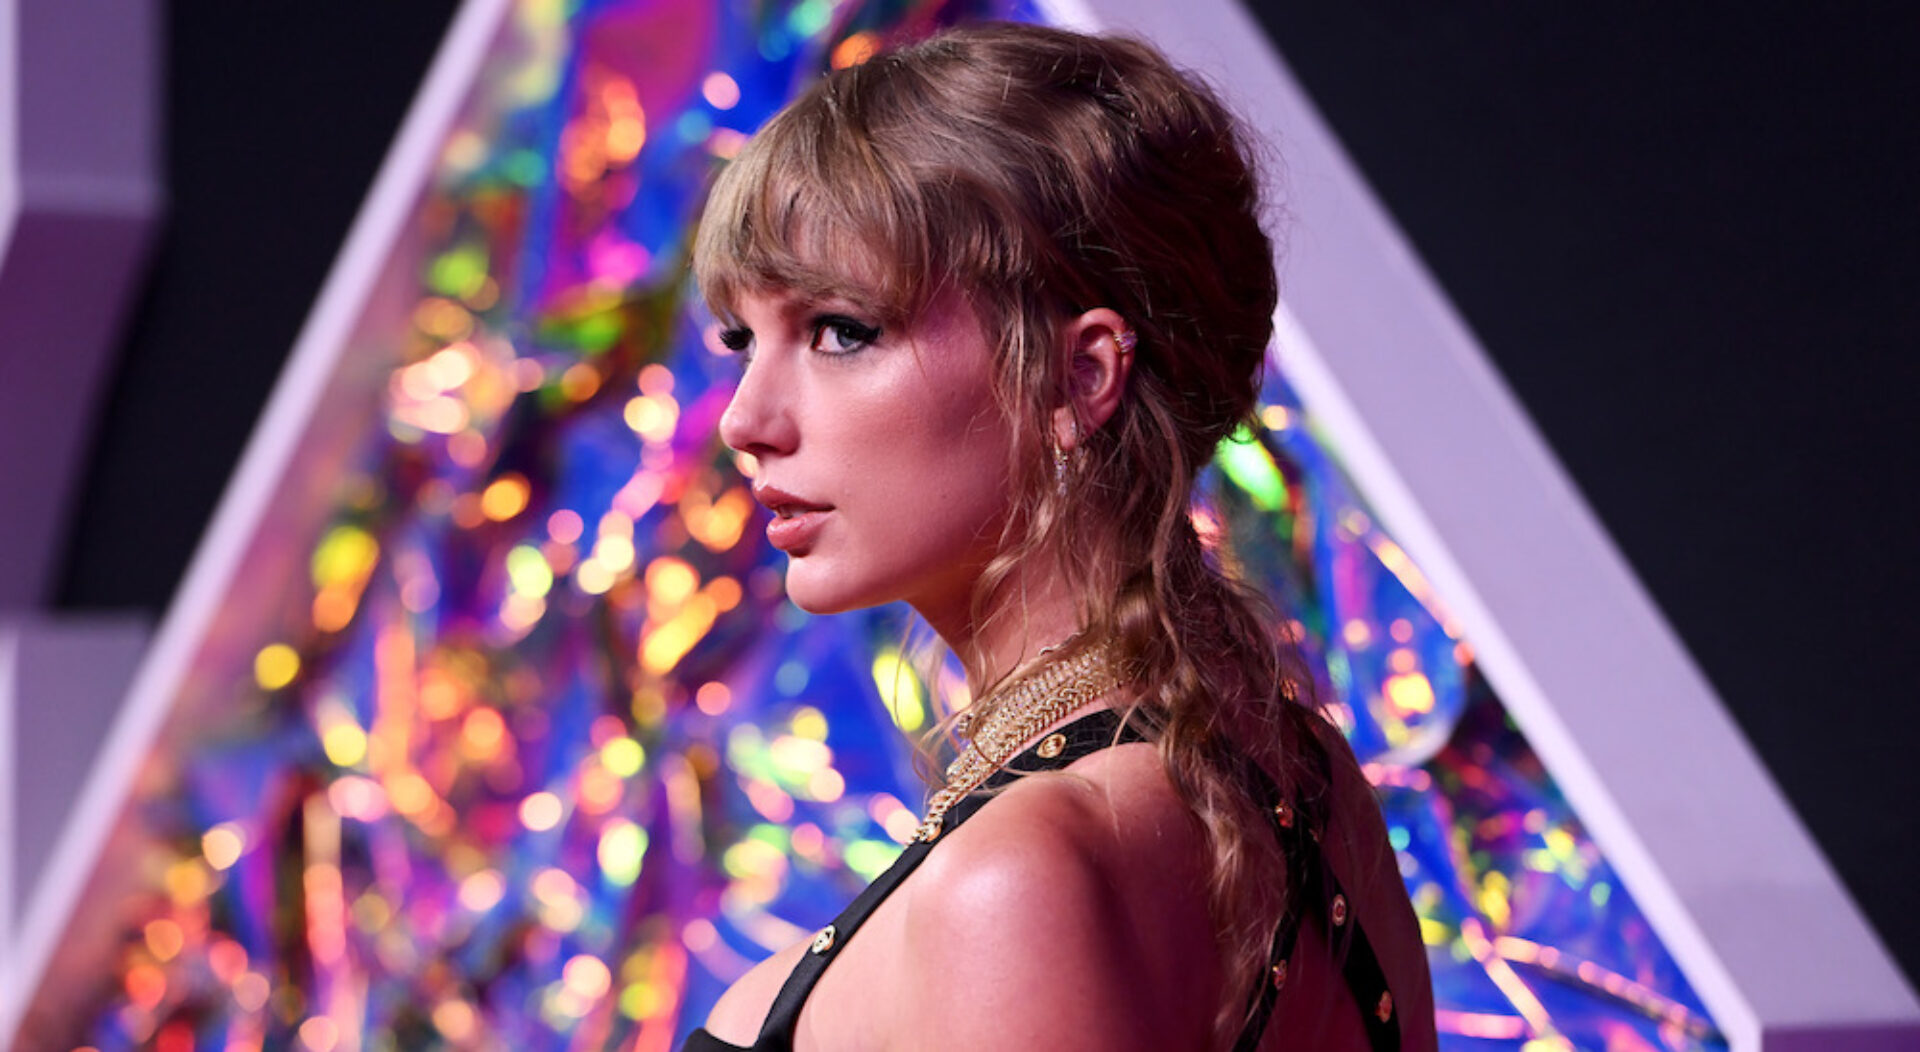 Taylor Swift was named the 2023 Person of the Year by TIME. In an exclusive interview, she reveals some behind-the-scenes information from her Eras Tour.